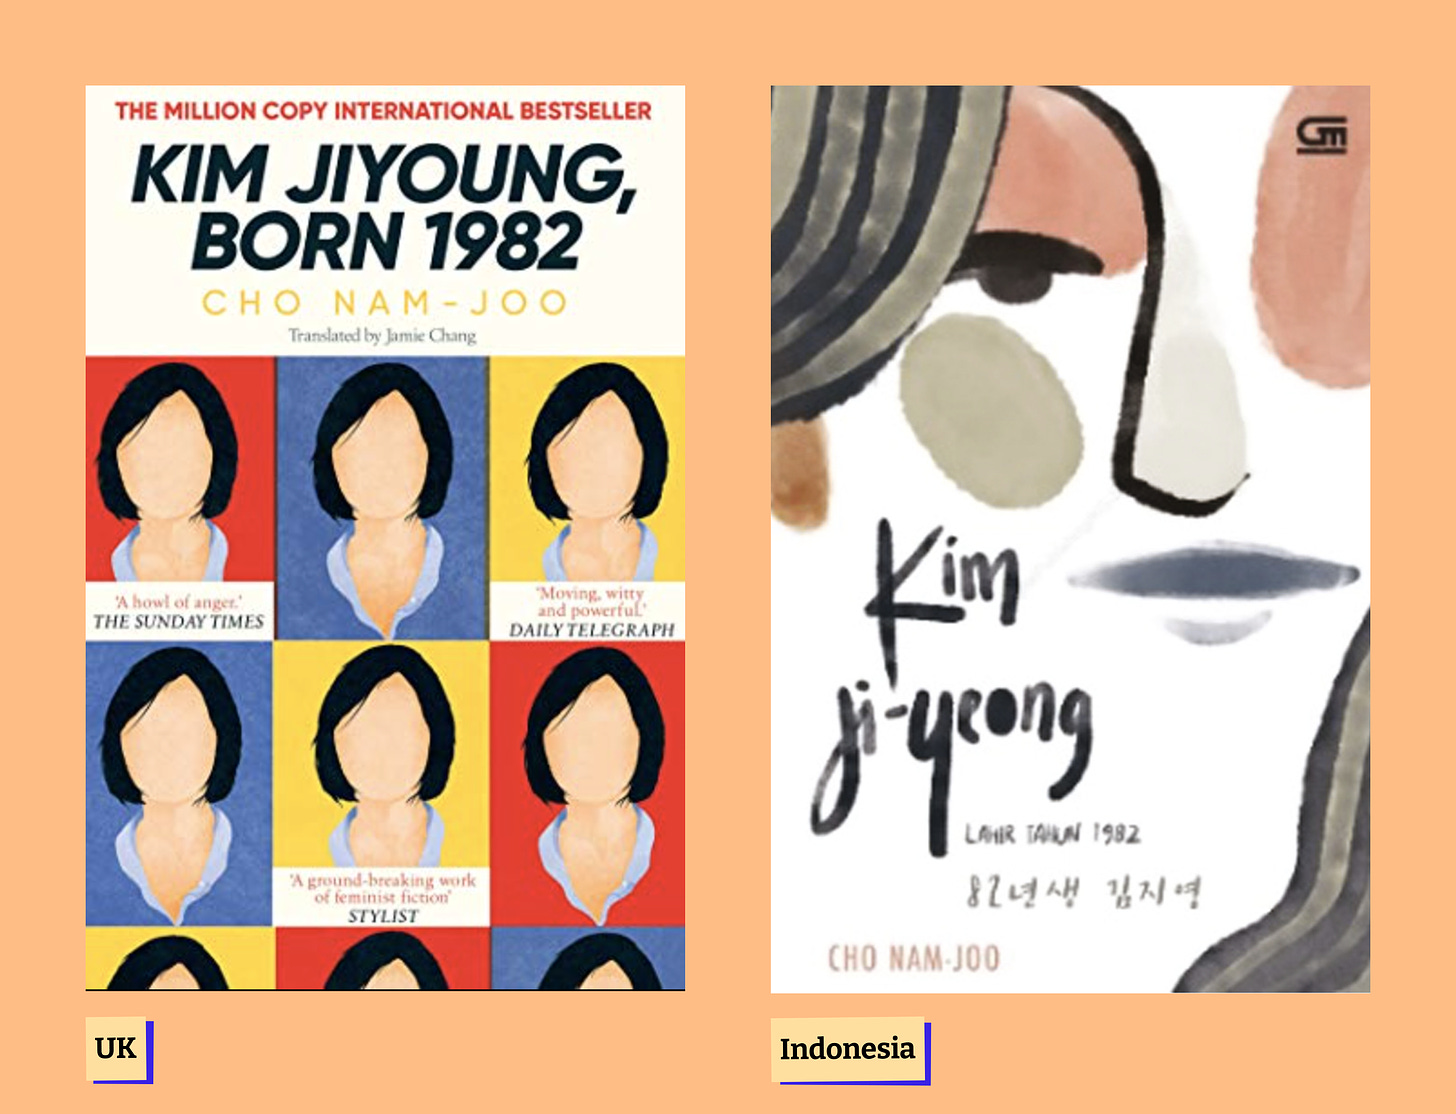 Kim Jiyoung Born 1982 by Cho Nam Joo UK book cover and Indonesia book cover